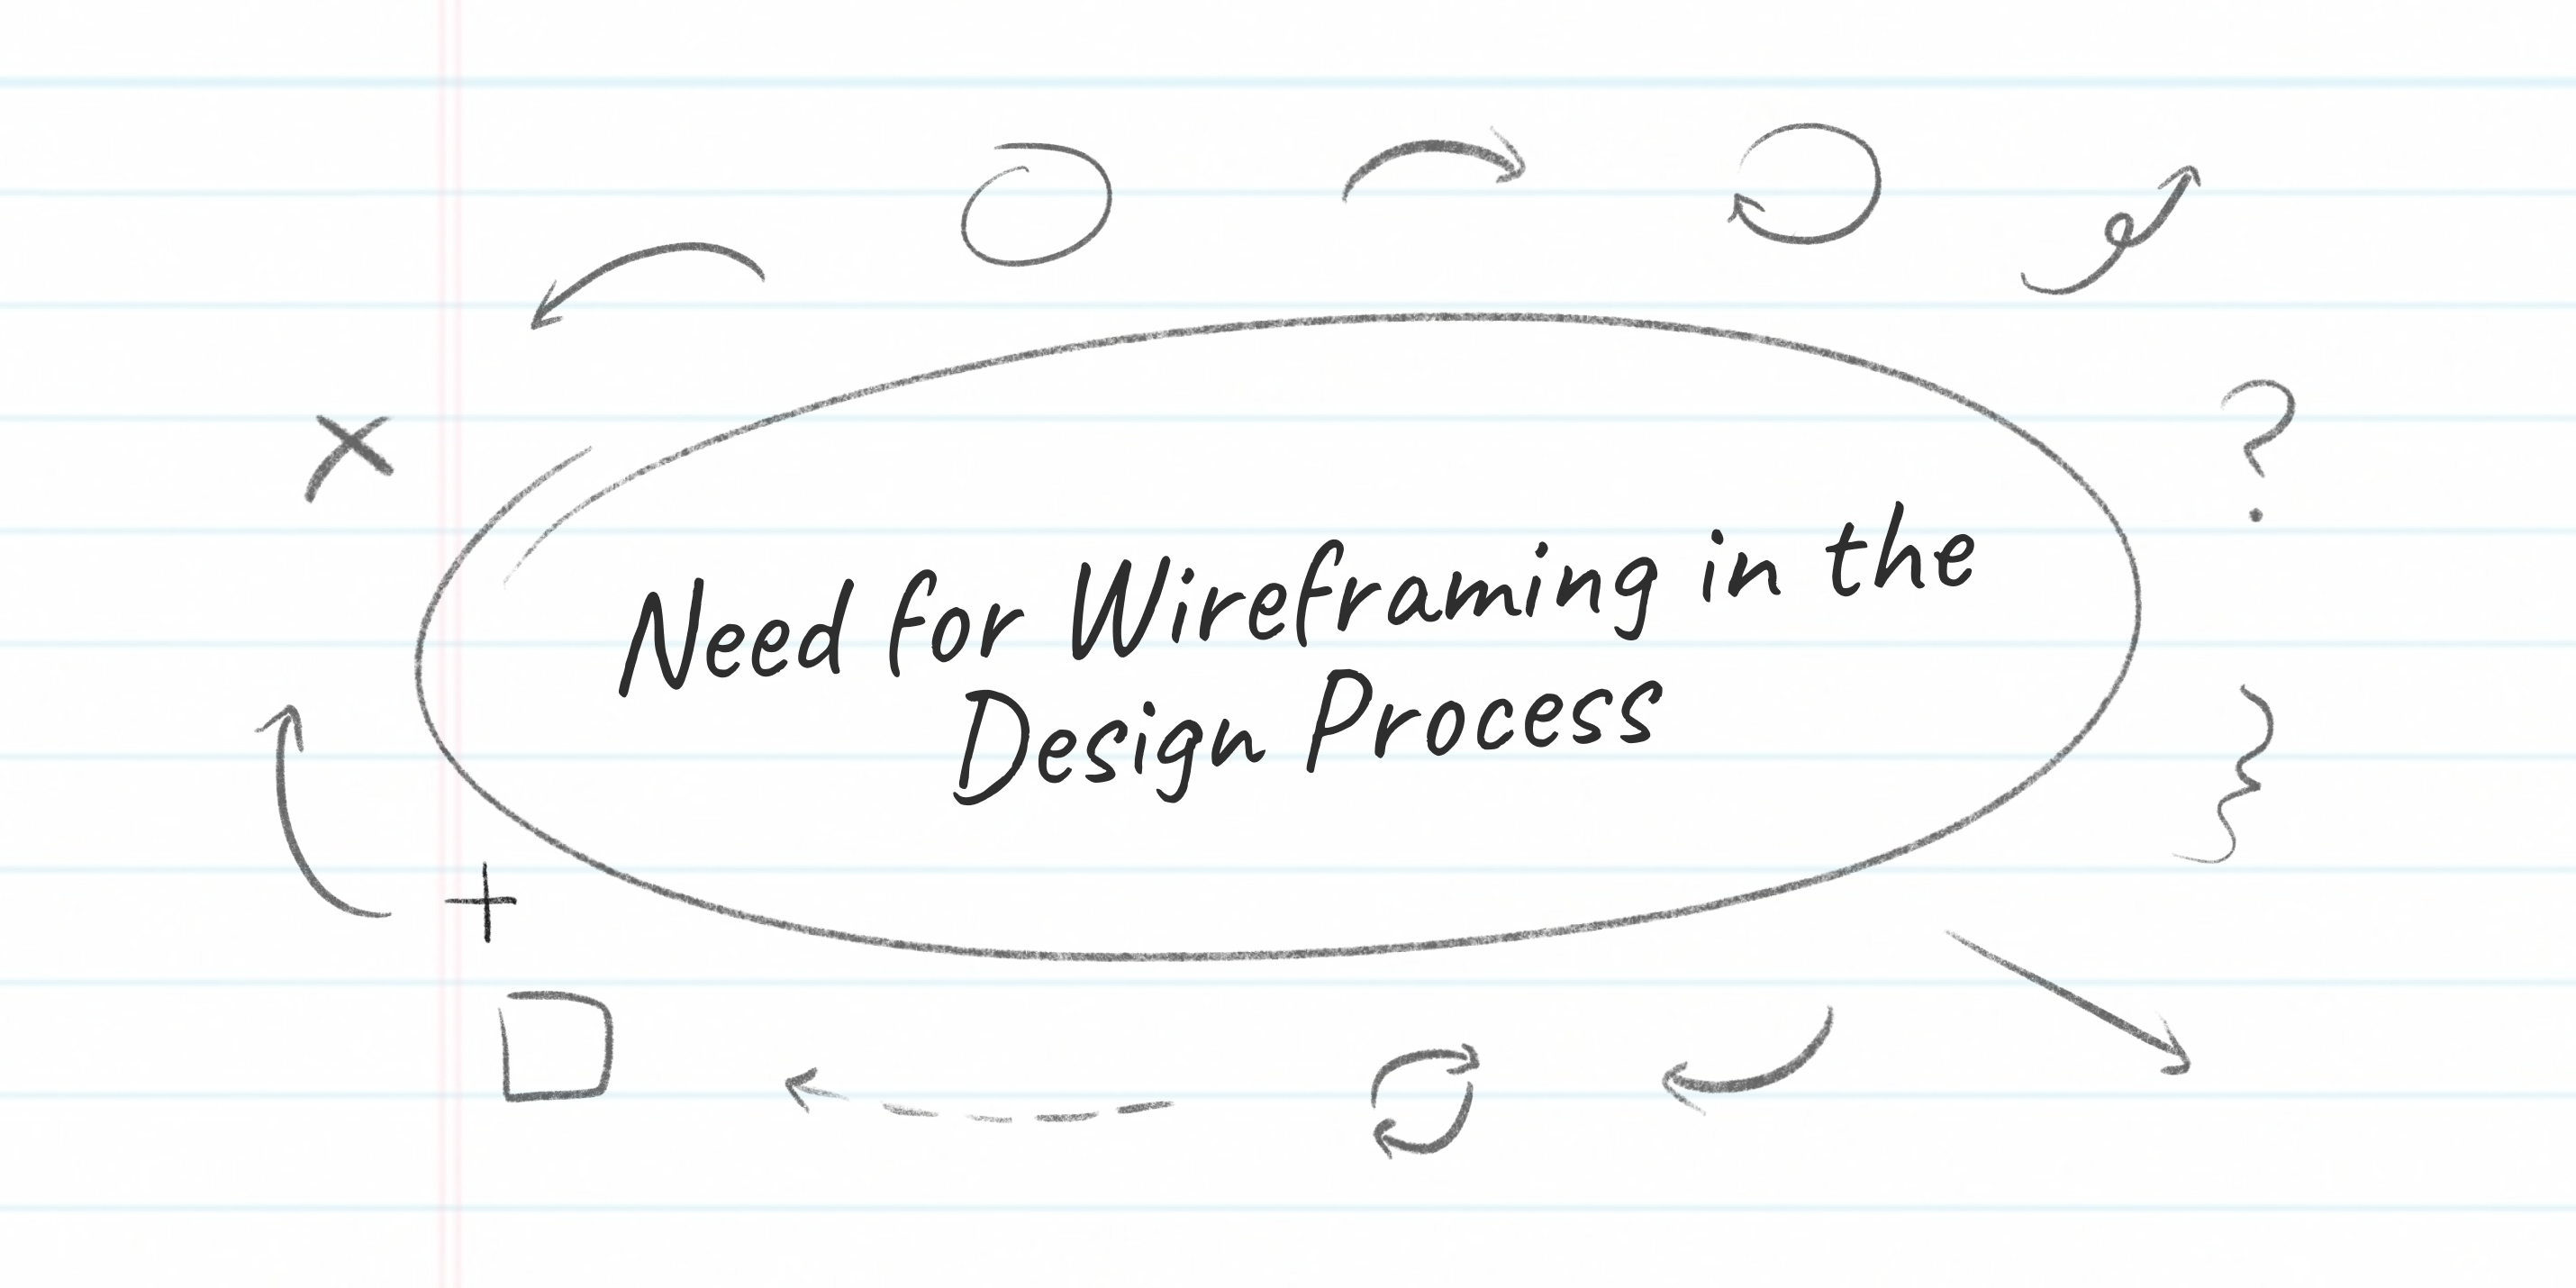 Why the Design Process needs 'Wireframing' to succeed